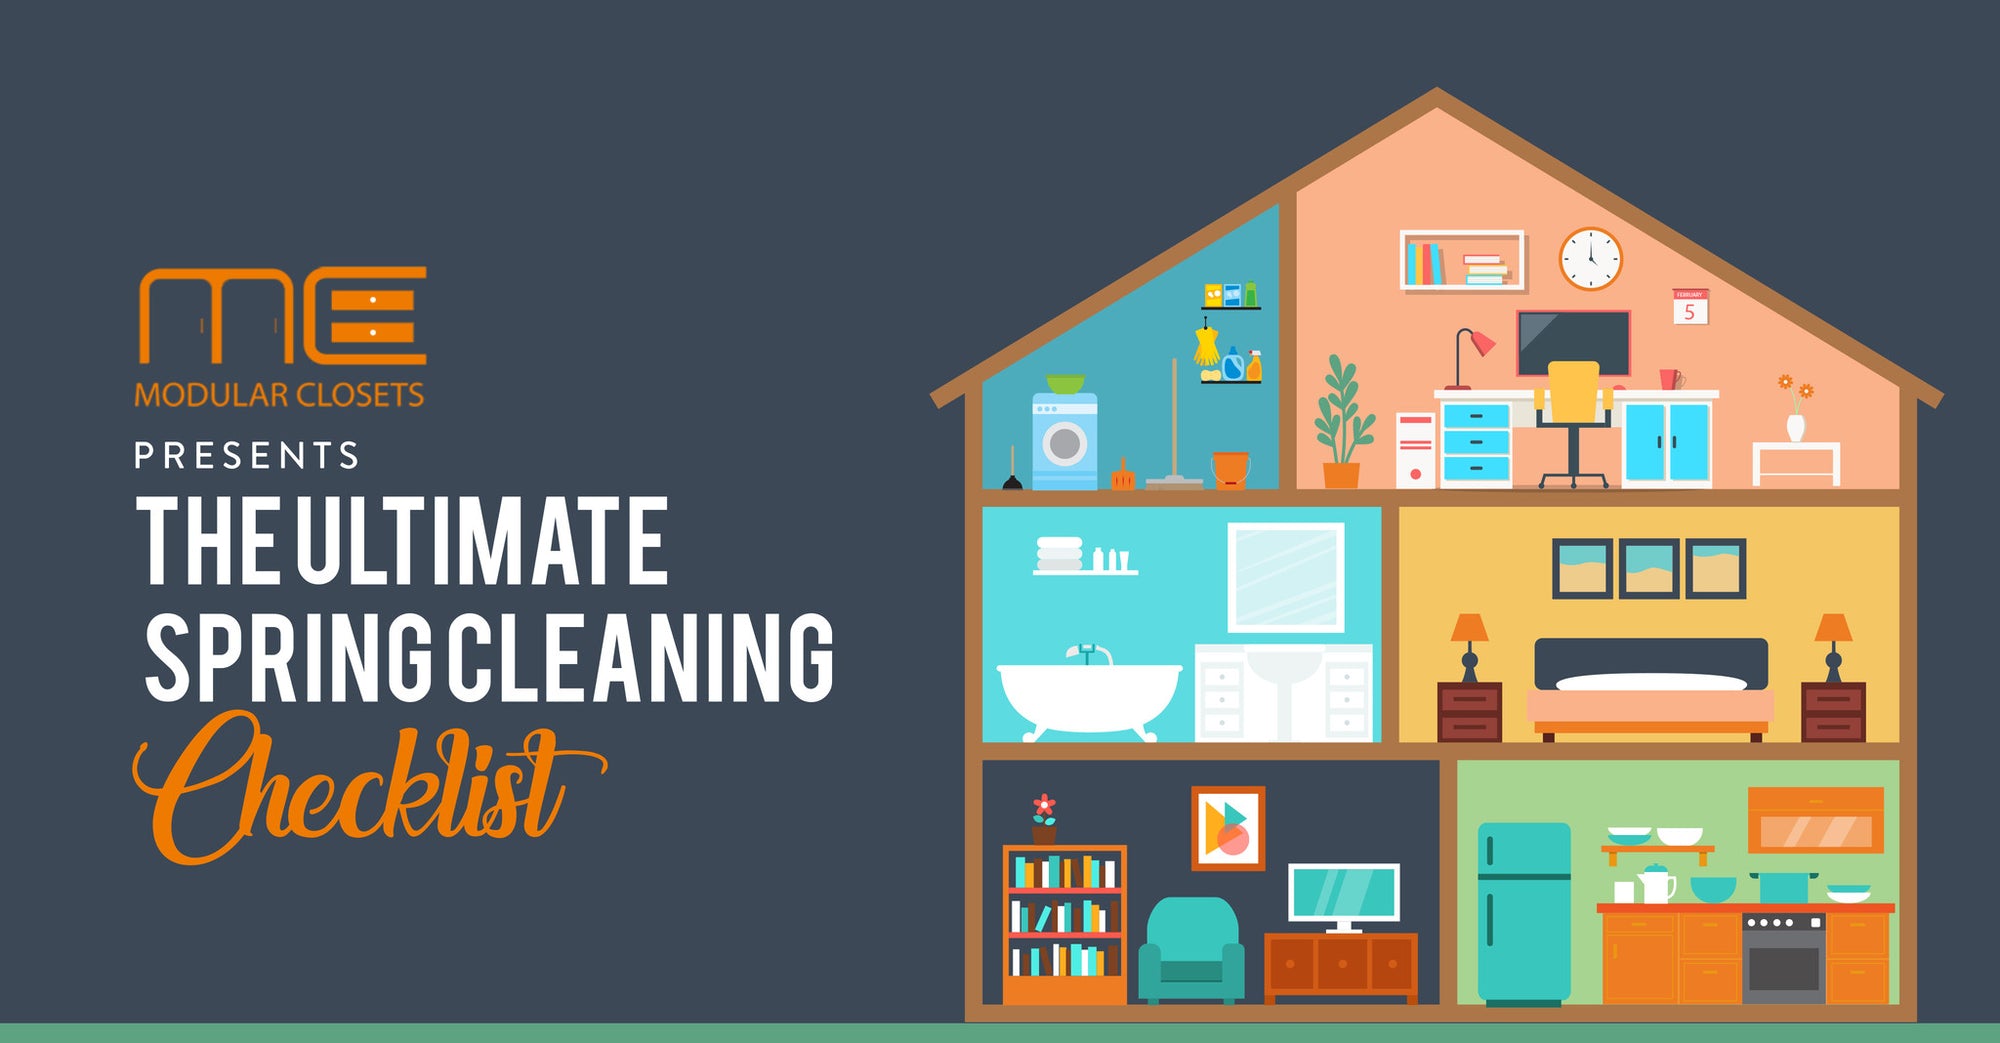 The Most Ultimate Spring Cleaning 2017 Checklist